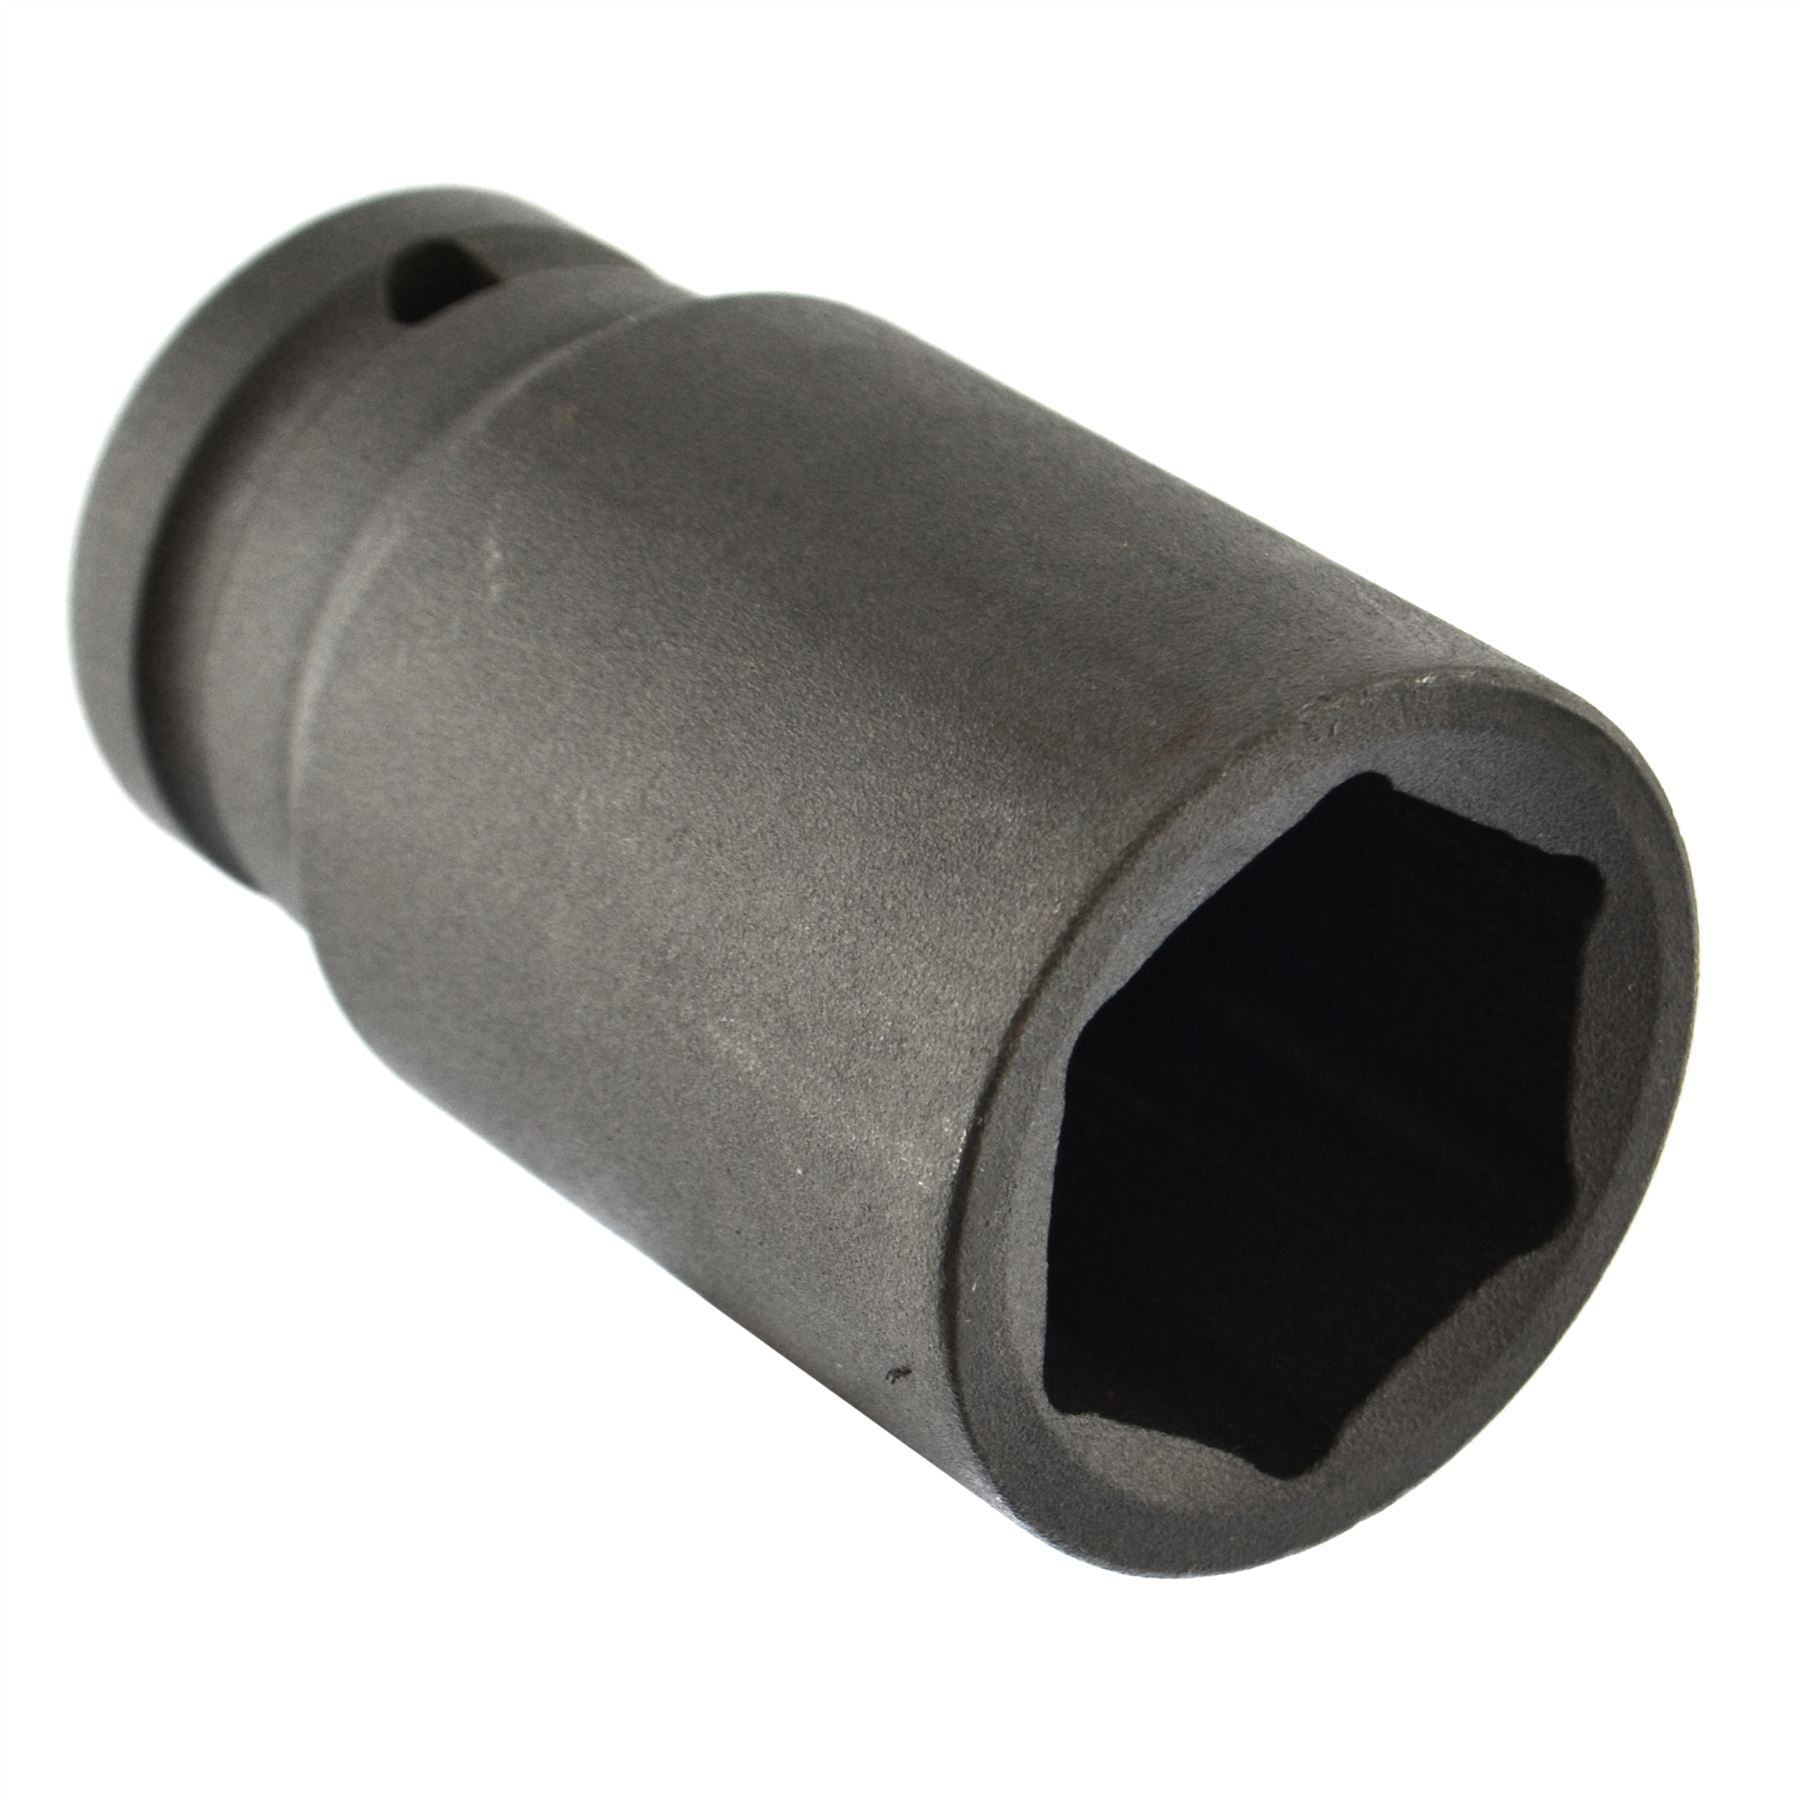 32mm Metric 3/4 Drive Double Deep Impact Socket 6 Sided Single Hex Thick Walled